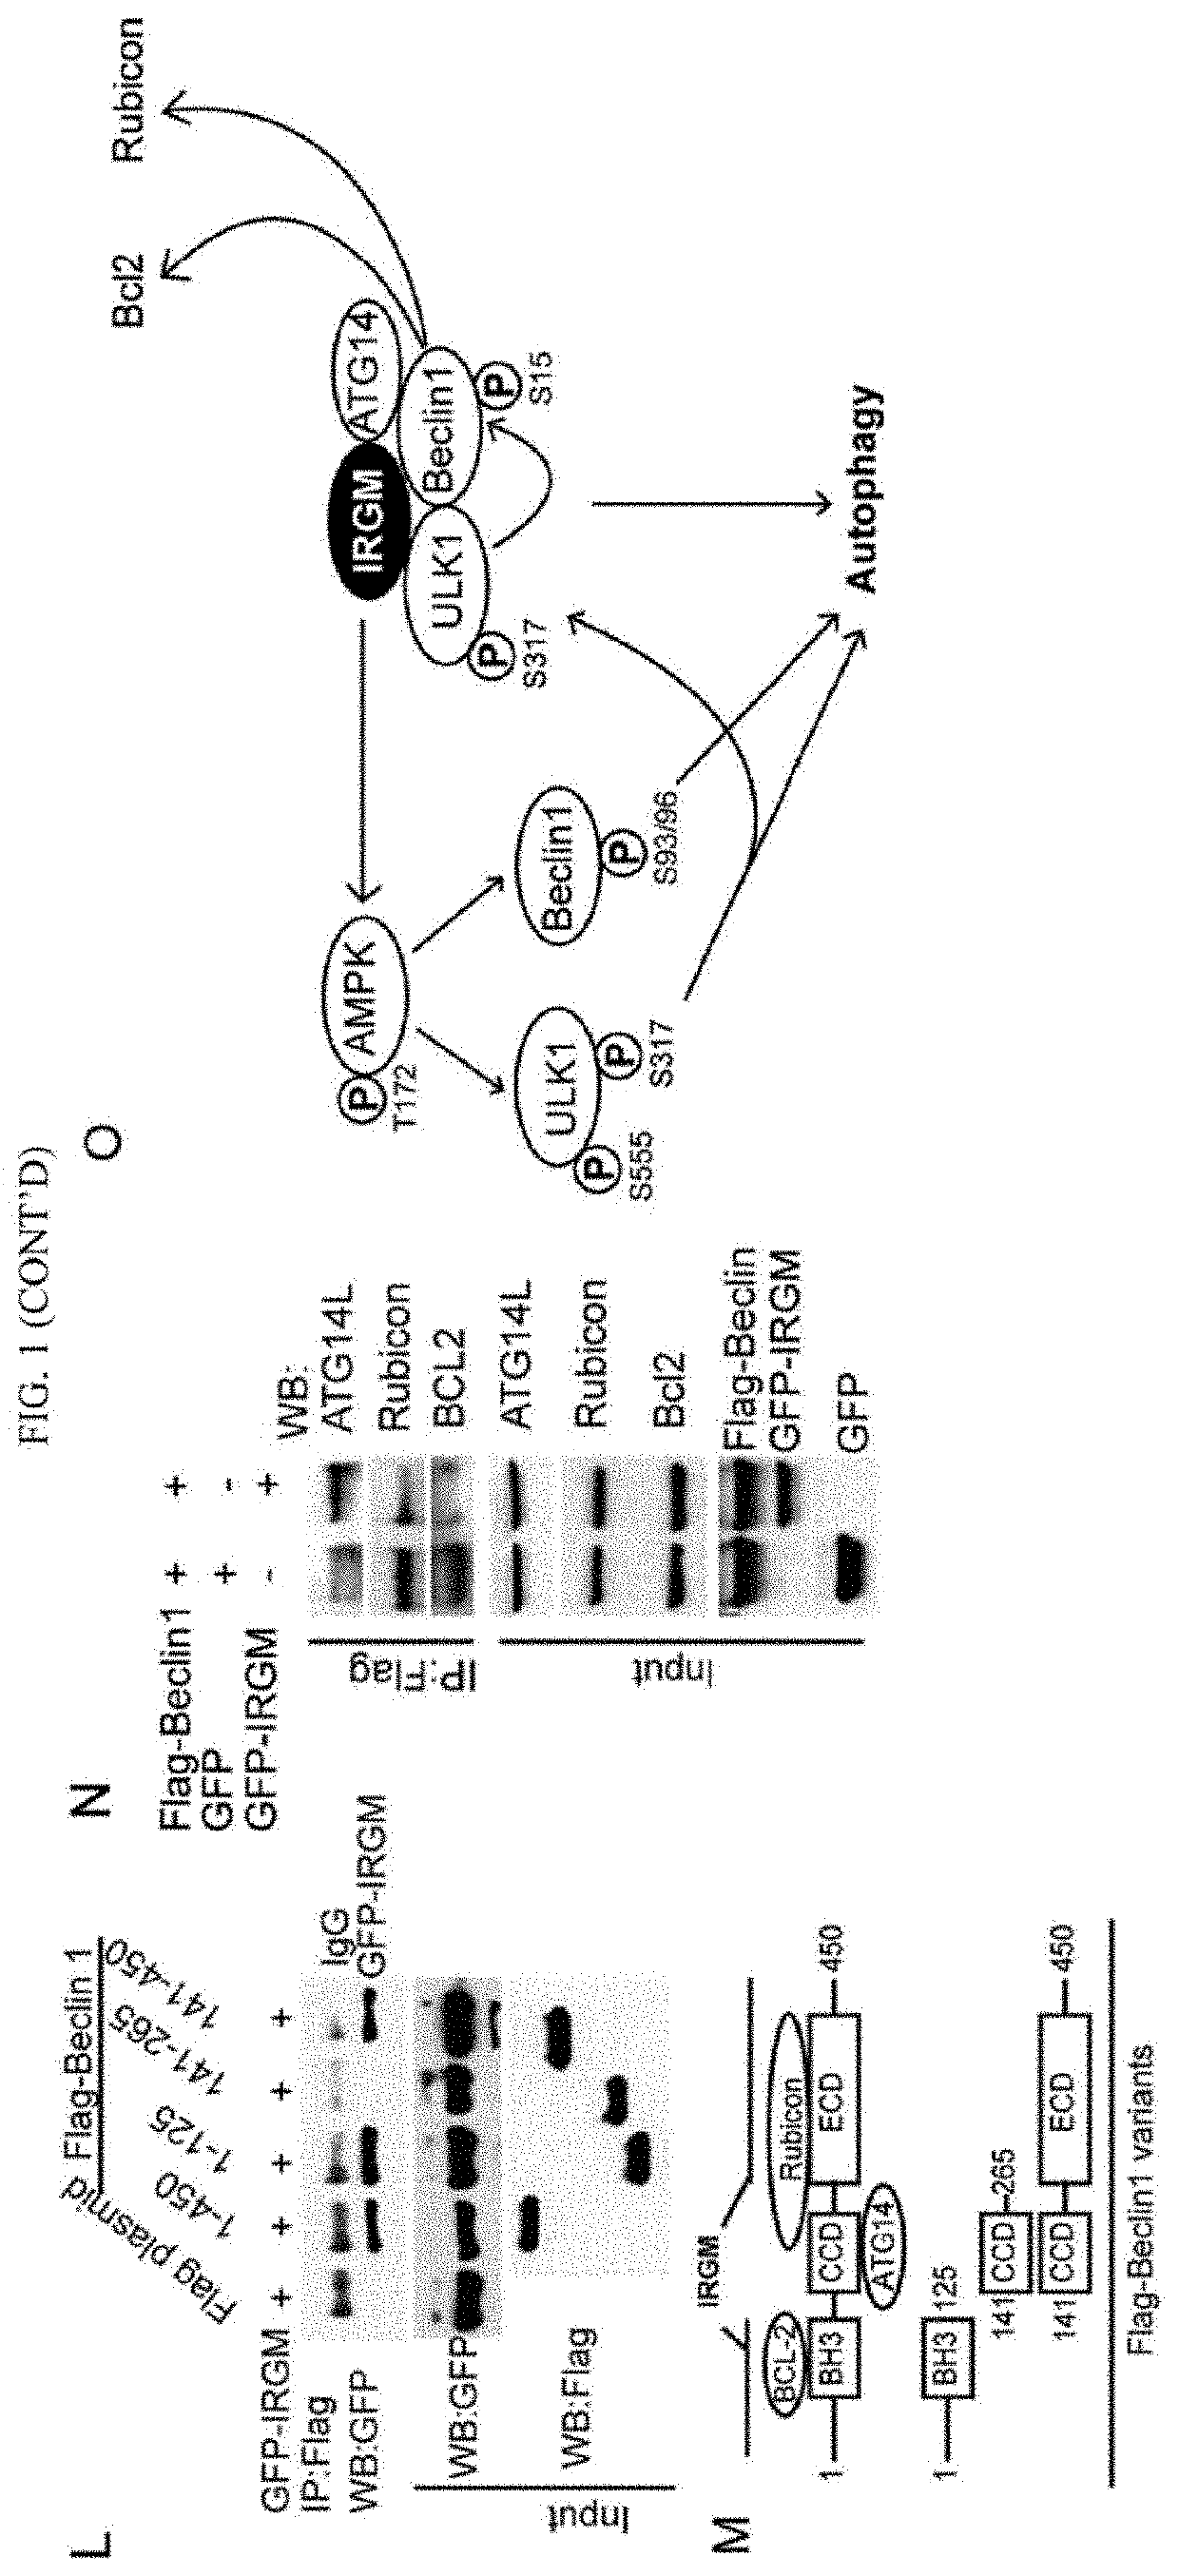 IRGM and precision autophagy controls for antimicrobial and inflammatory disease states and methods of detection of autophagy